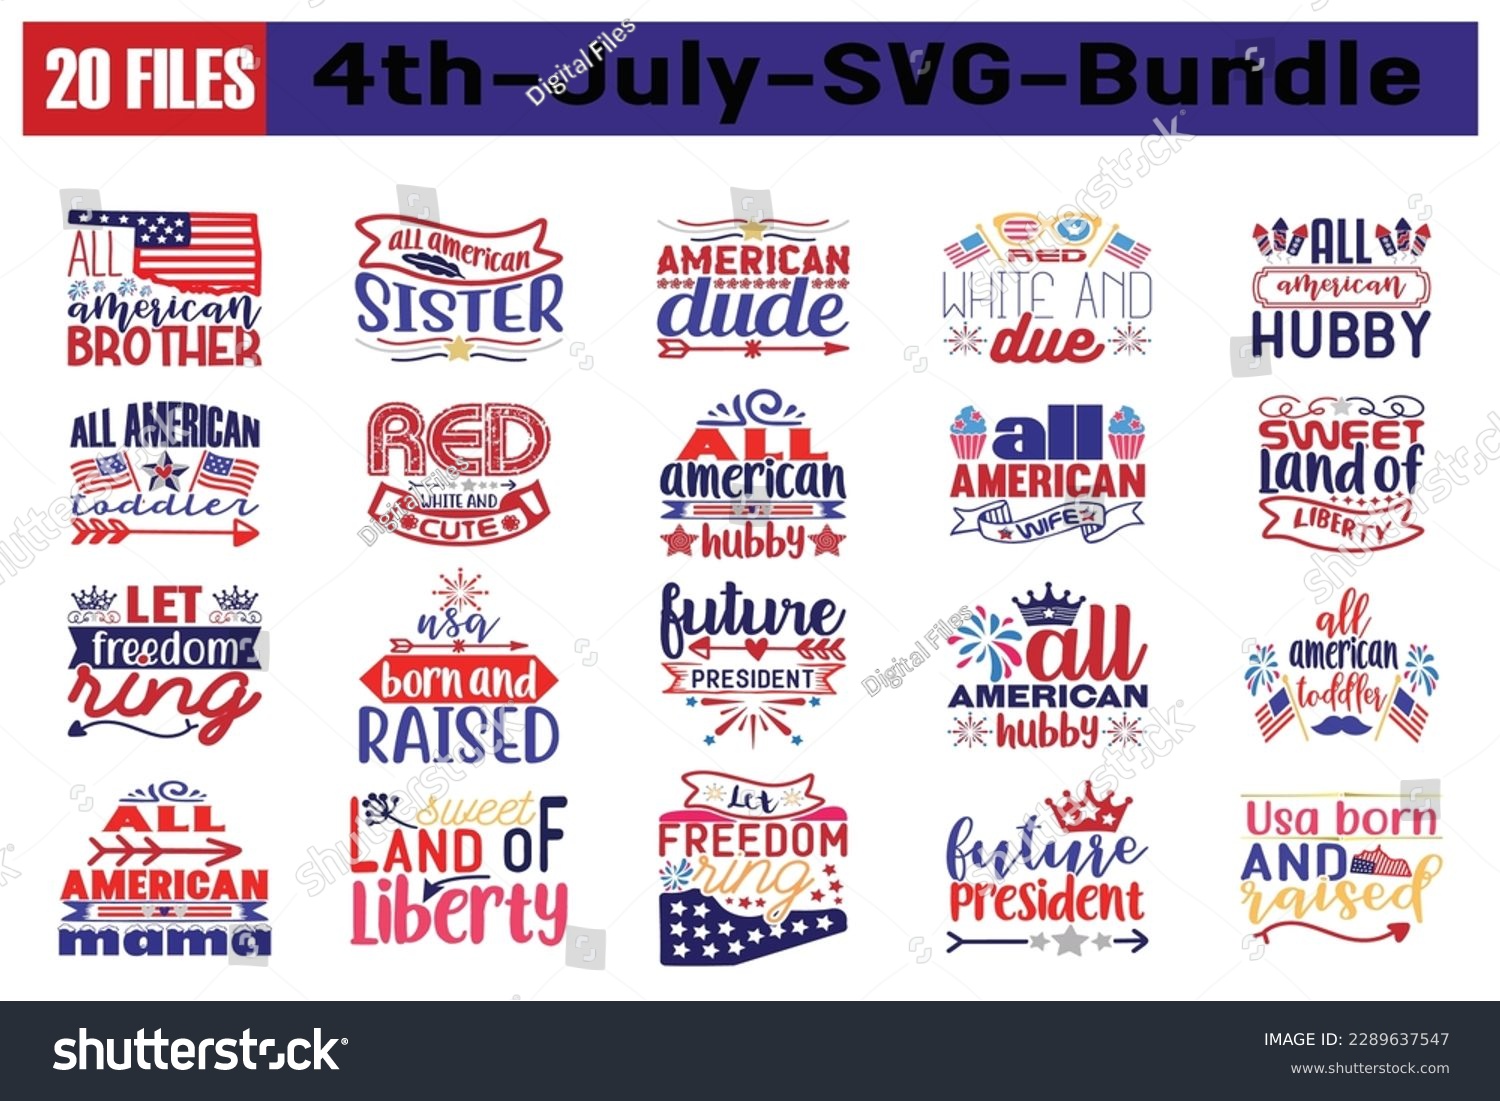 SVG of 4th july Quotes svg Cut Files Designs Bundle.4th july quotes t shirt cut files,4th july quotes t shirt designs,Saying about 4th july. svg